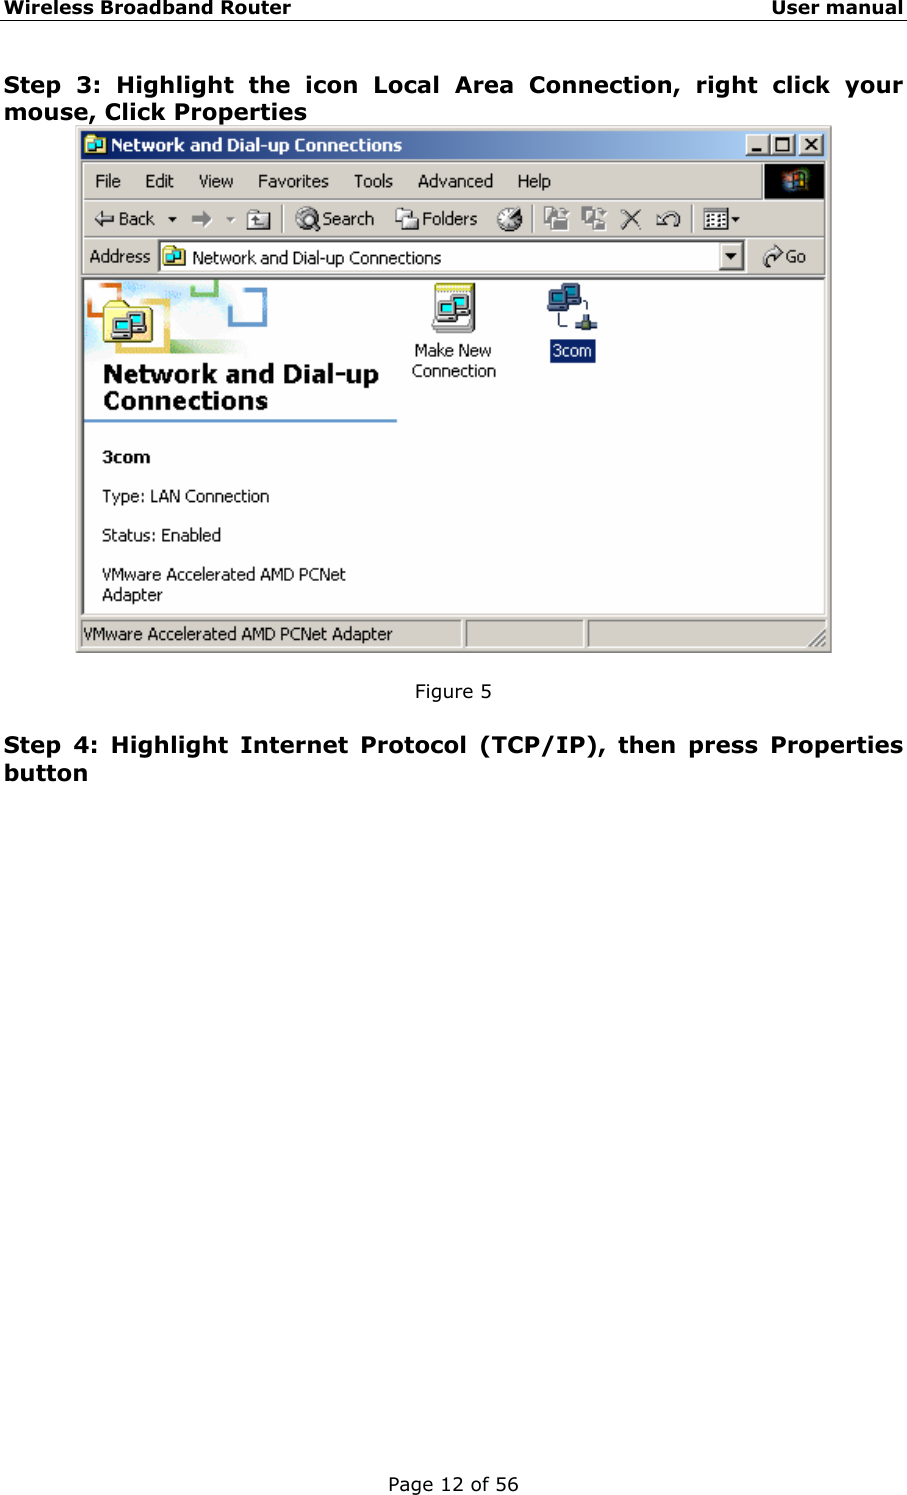 Wireless Broadband Router                                                   User manual Page 12 of 56 Step 3: Highlight the icon Local Area Connection, right click your mouse, Click Properties   Figure 5  Step 4: Highlight Internet Protocol (TCP/IP), then press Properties button 